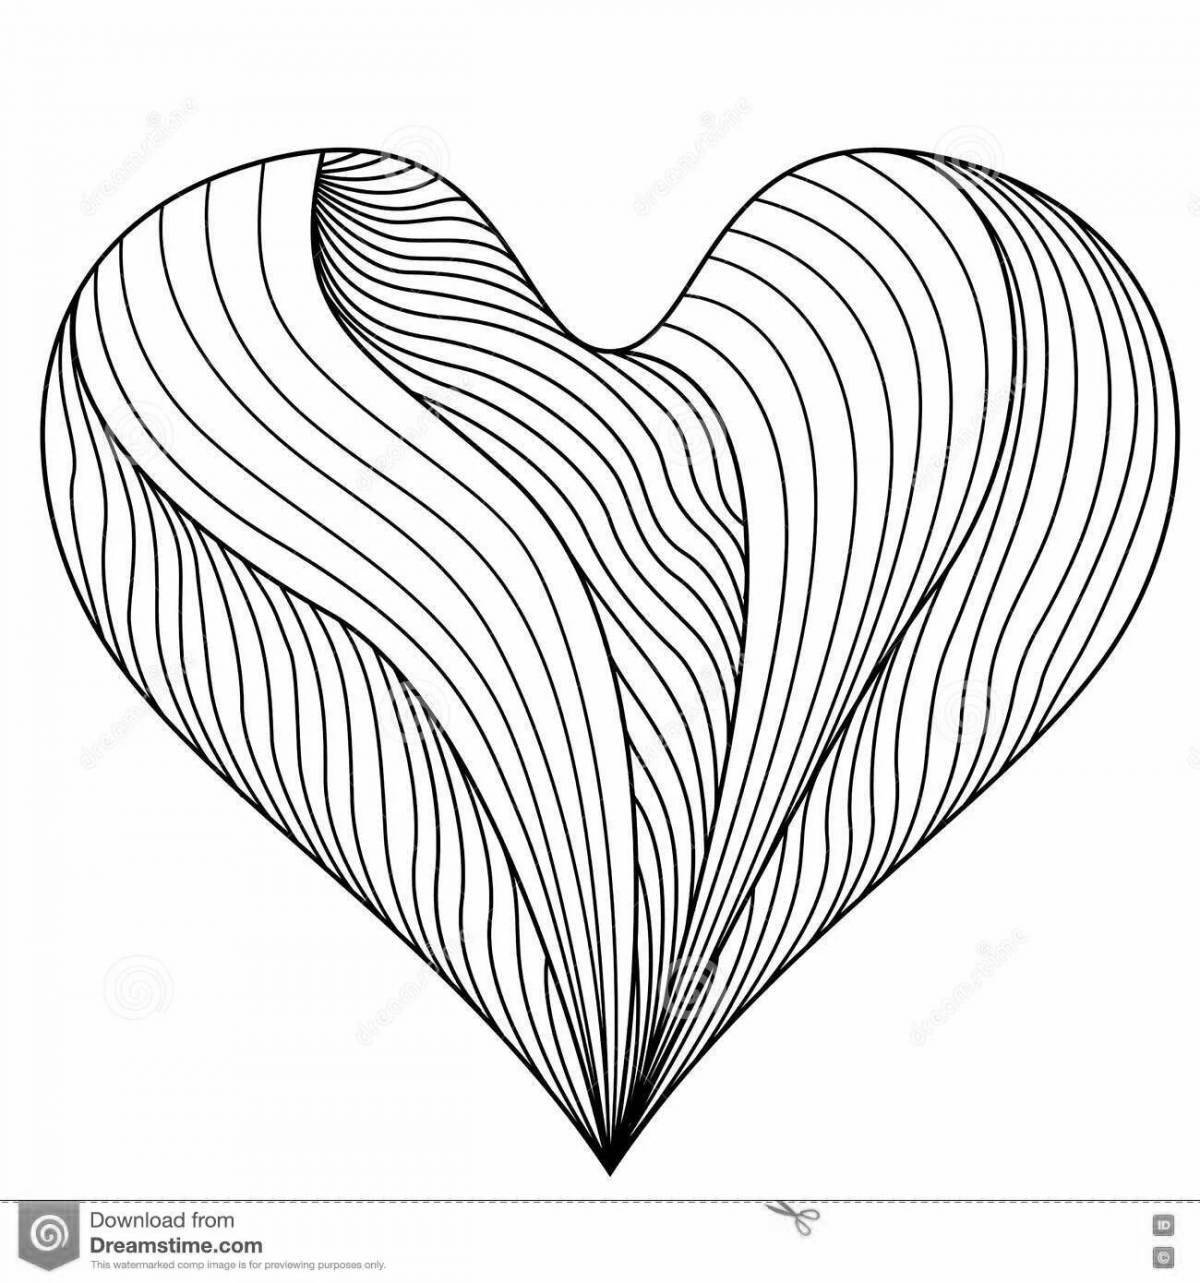 Cute coloring pages with hearts